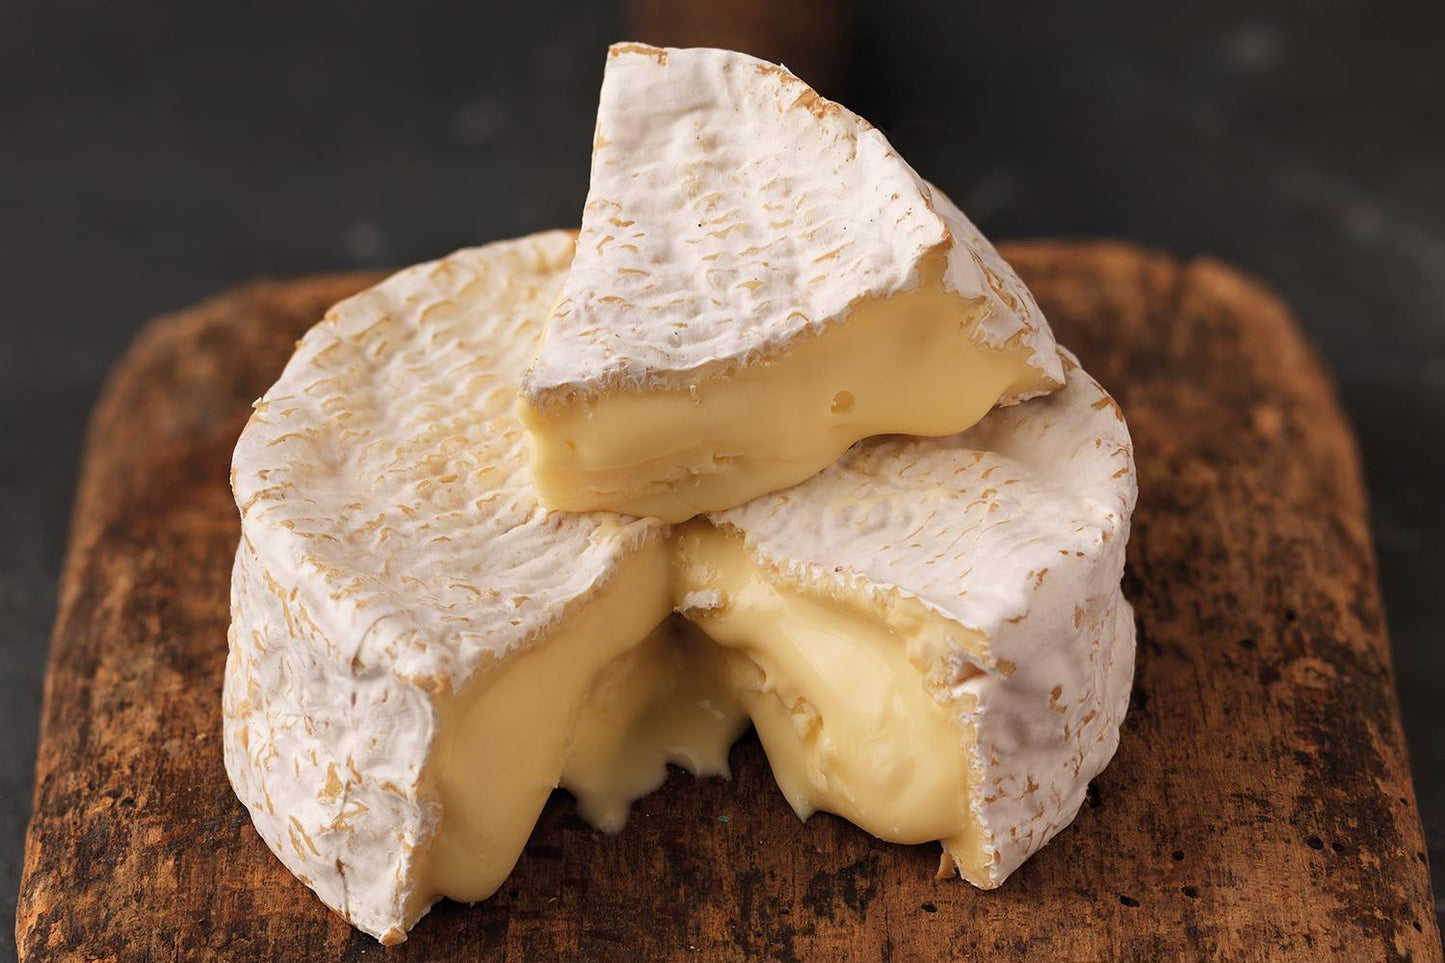 Baron Bigod British Brie Cheese Wheel with a wedge cut out and placed on top